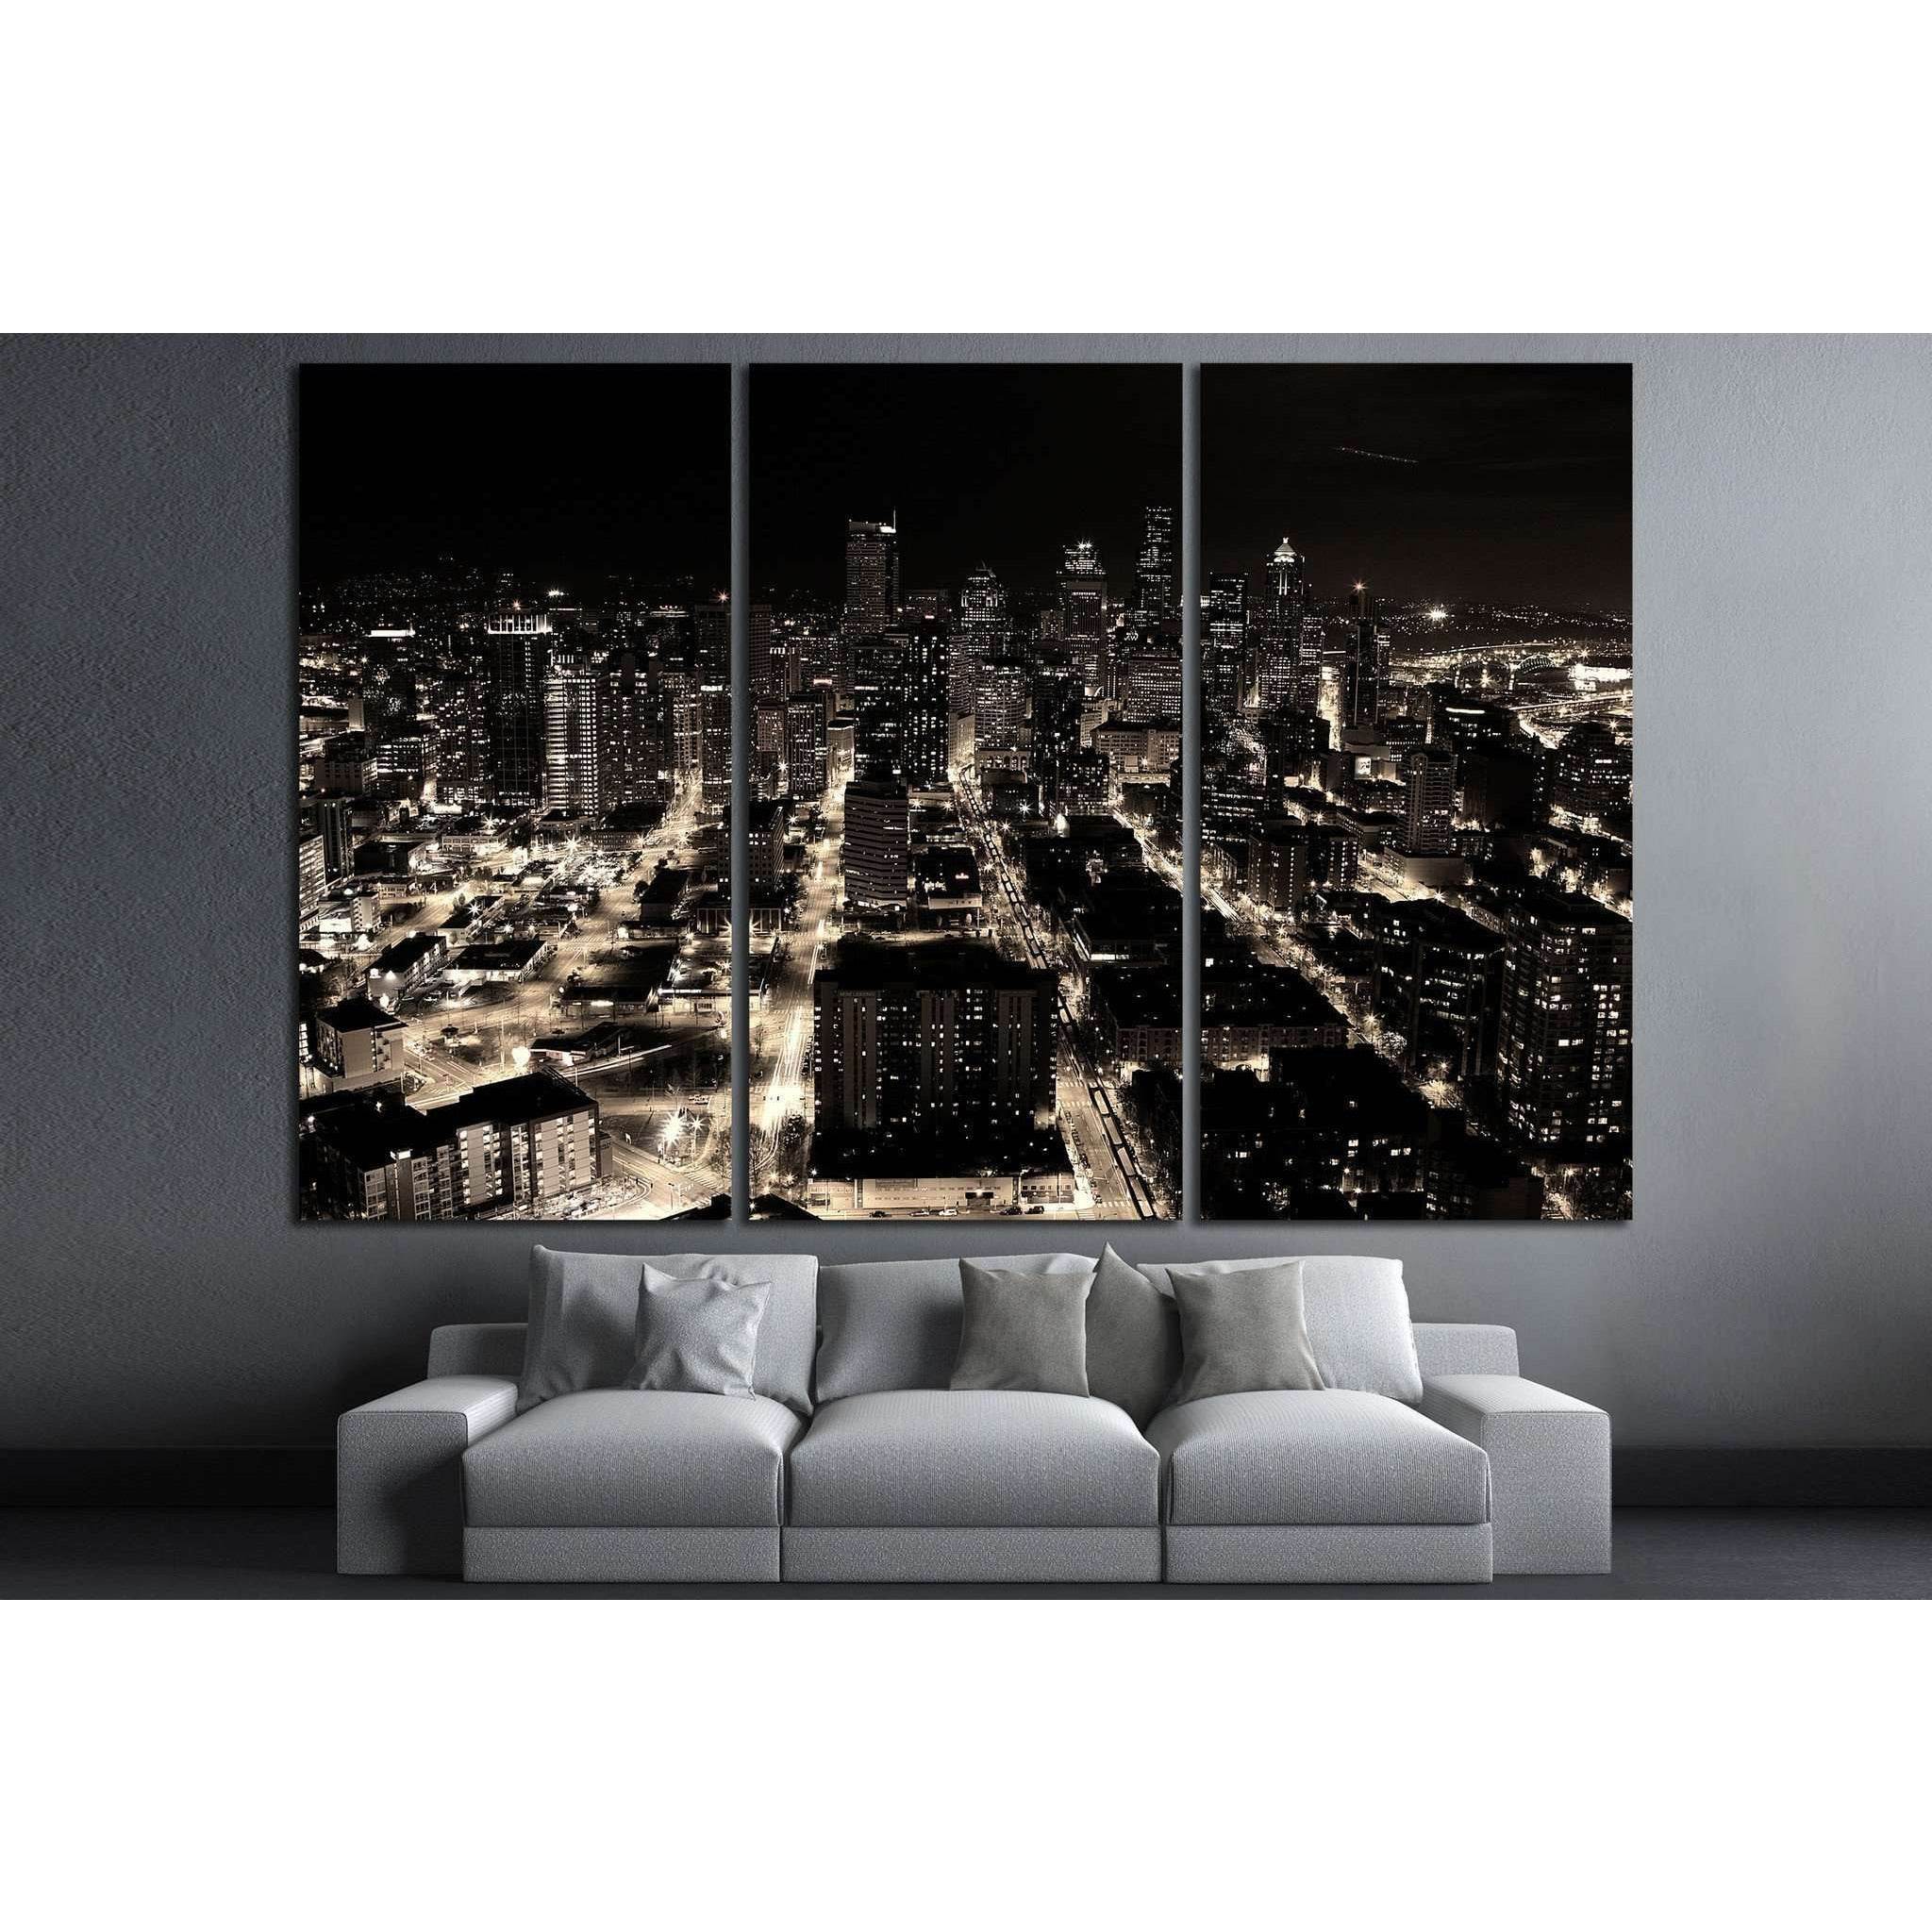 A night shot of the city of Seattle, US №1368 Ready to Hang Canvas Print